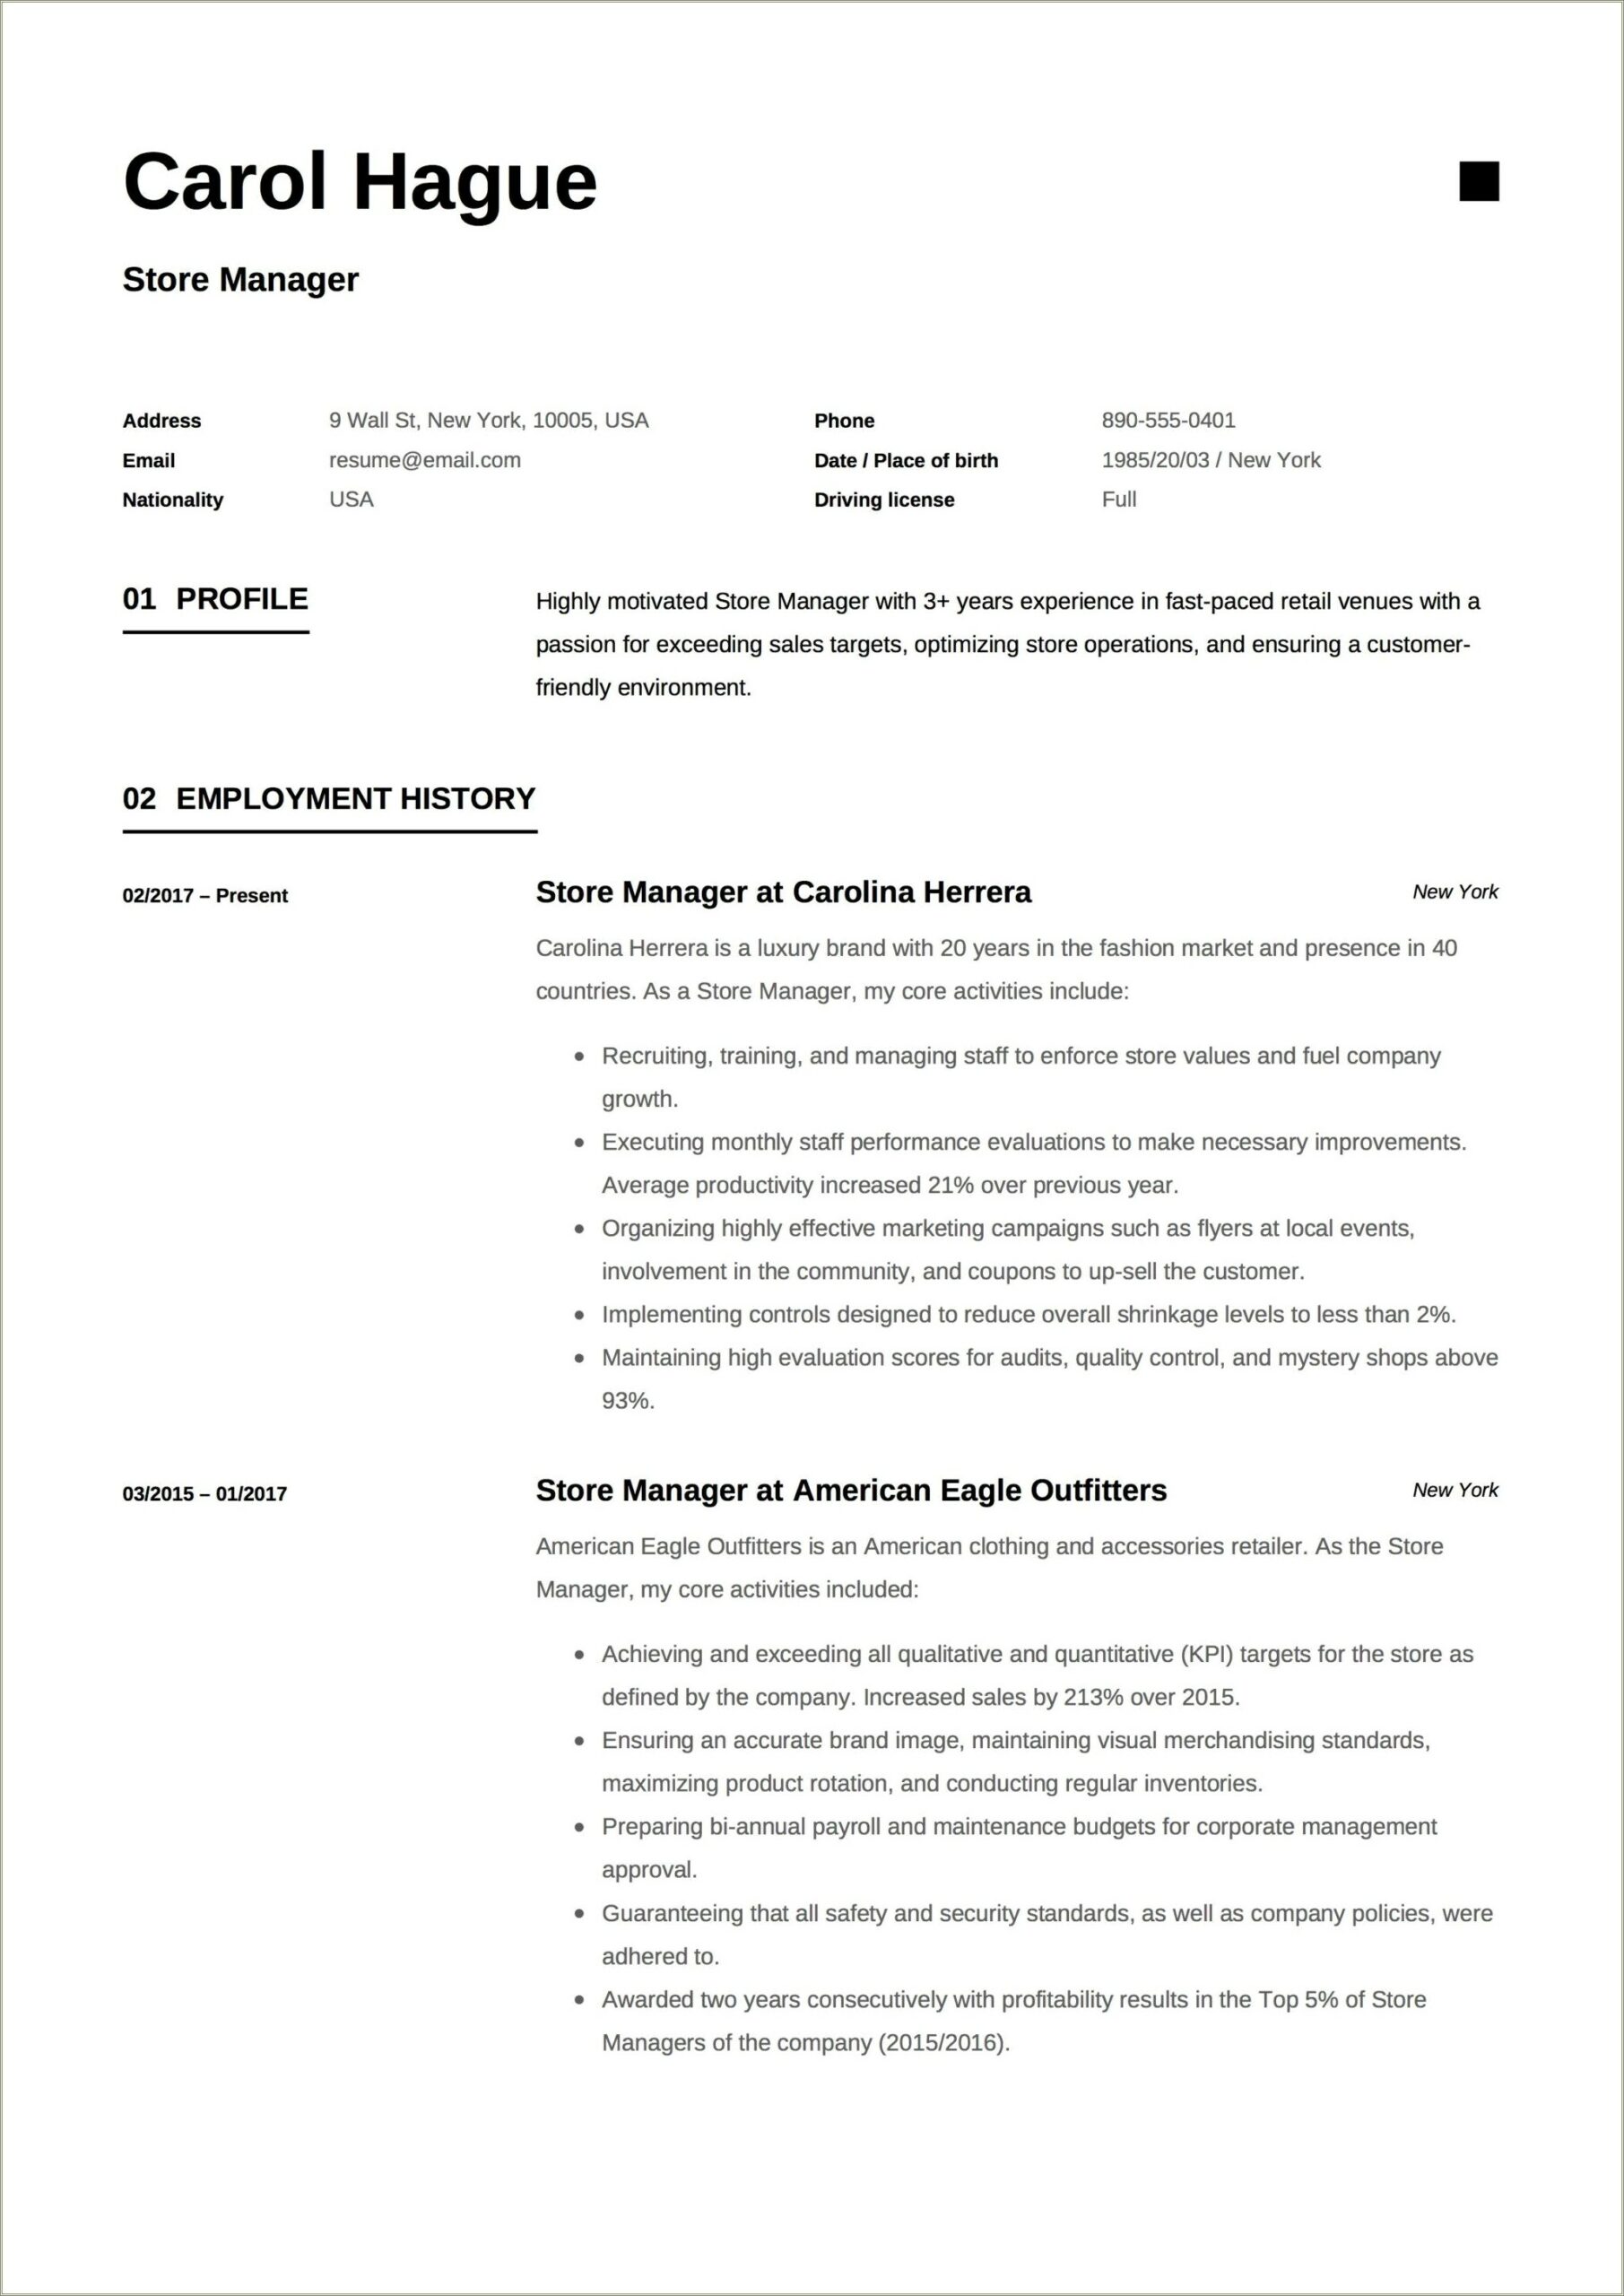 Best Resume Format For Retail Store Manager